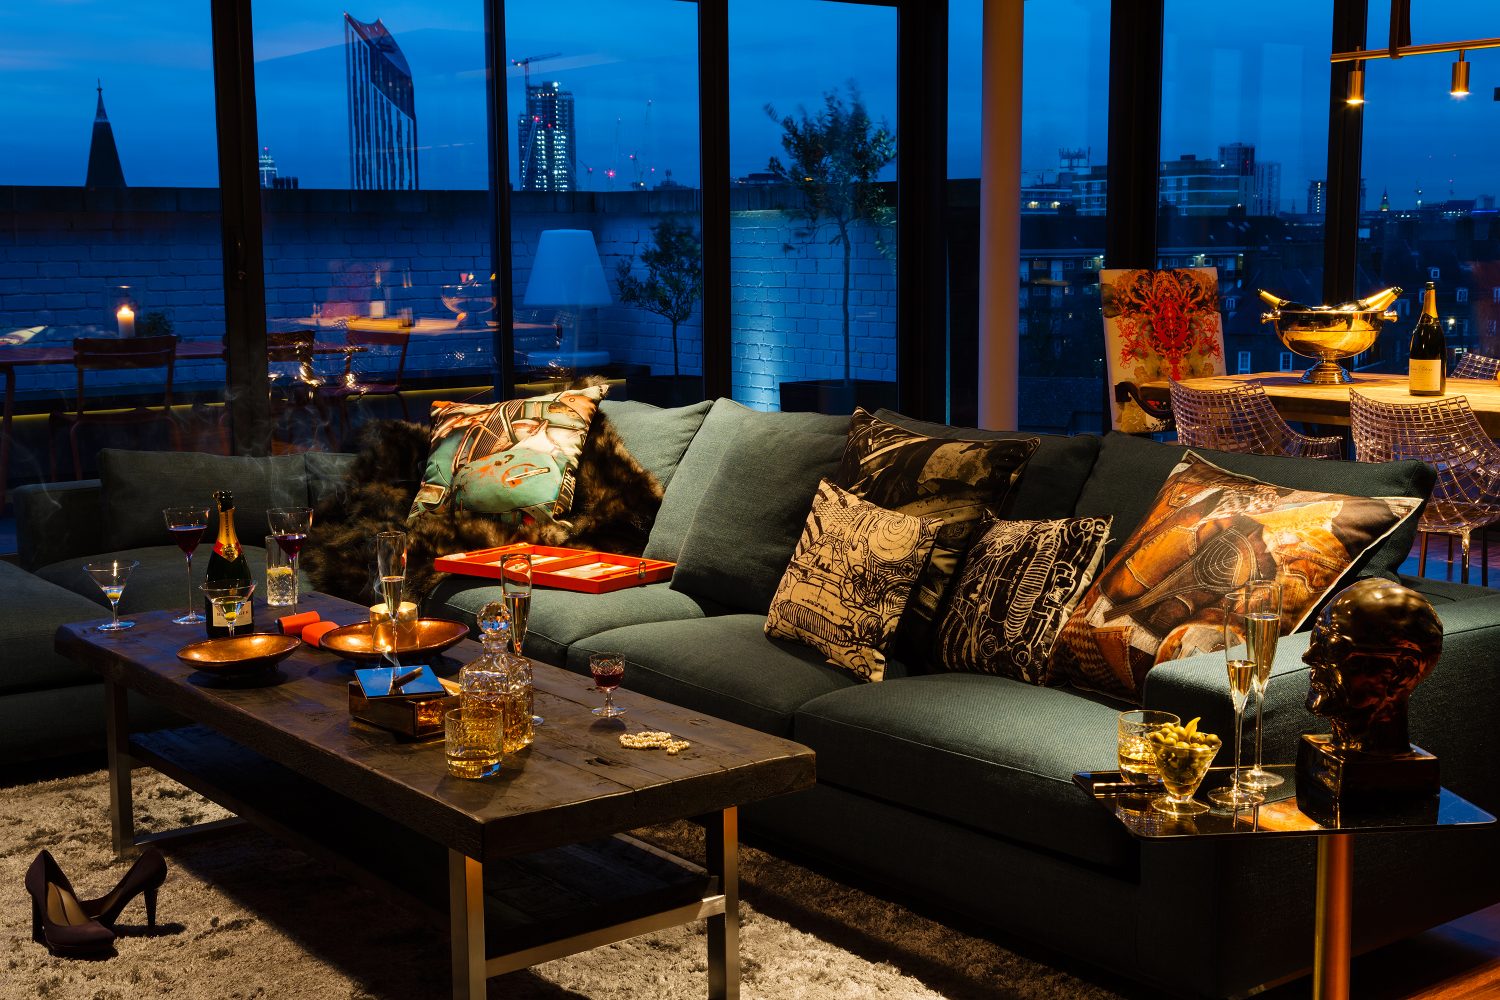 Night & Day by Daniel Hopwood – living room featuring a Minotti sofa in petrol blue. Penthouse interior design